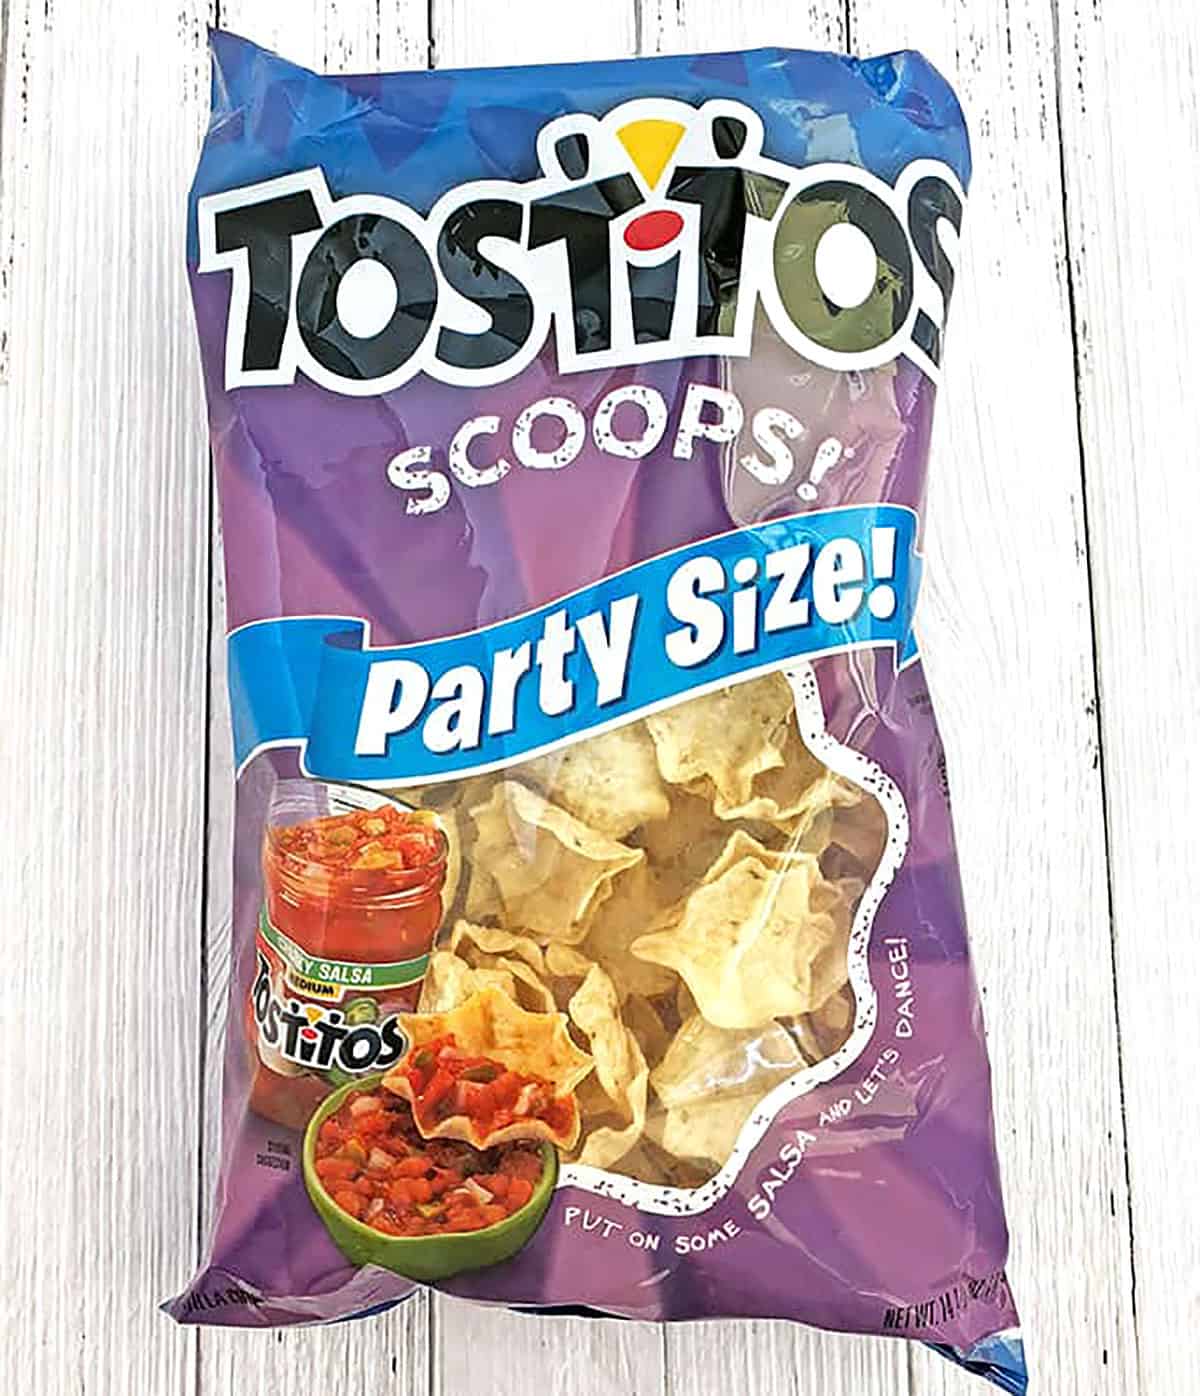 First we'll need a bag of Tostitos Scoops tortilla chips for these taco bites. 